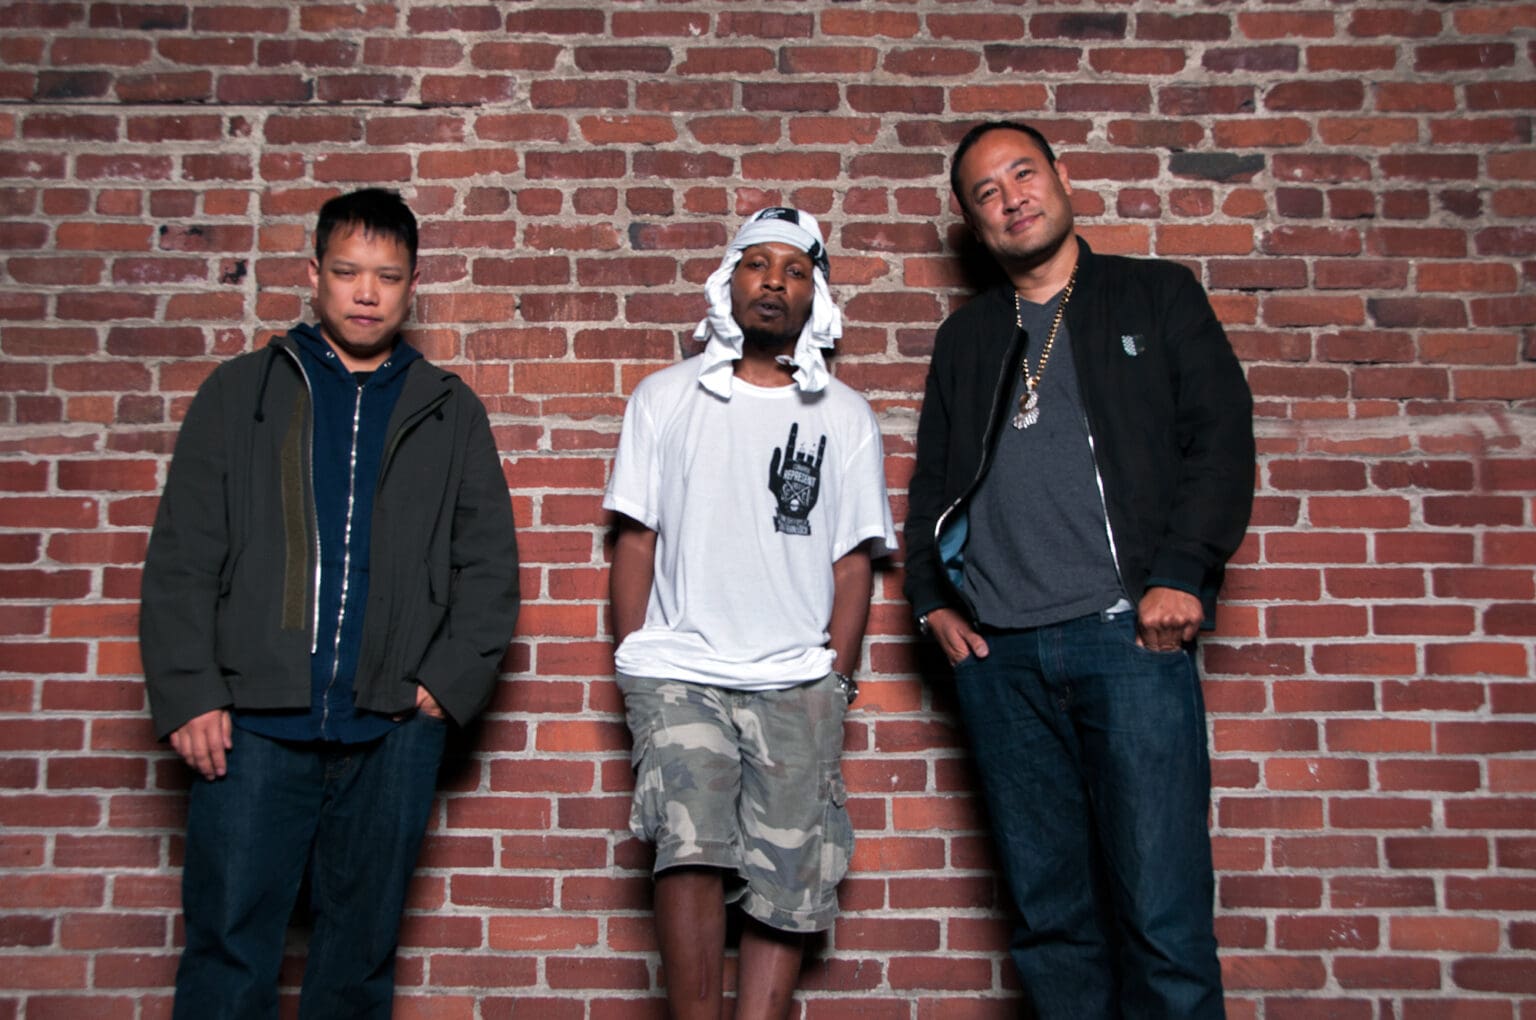 Hip-hop trio Deltron 3030 poses against the brick wall.